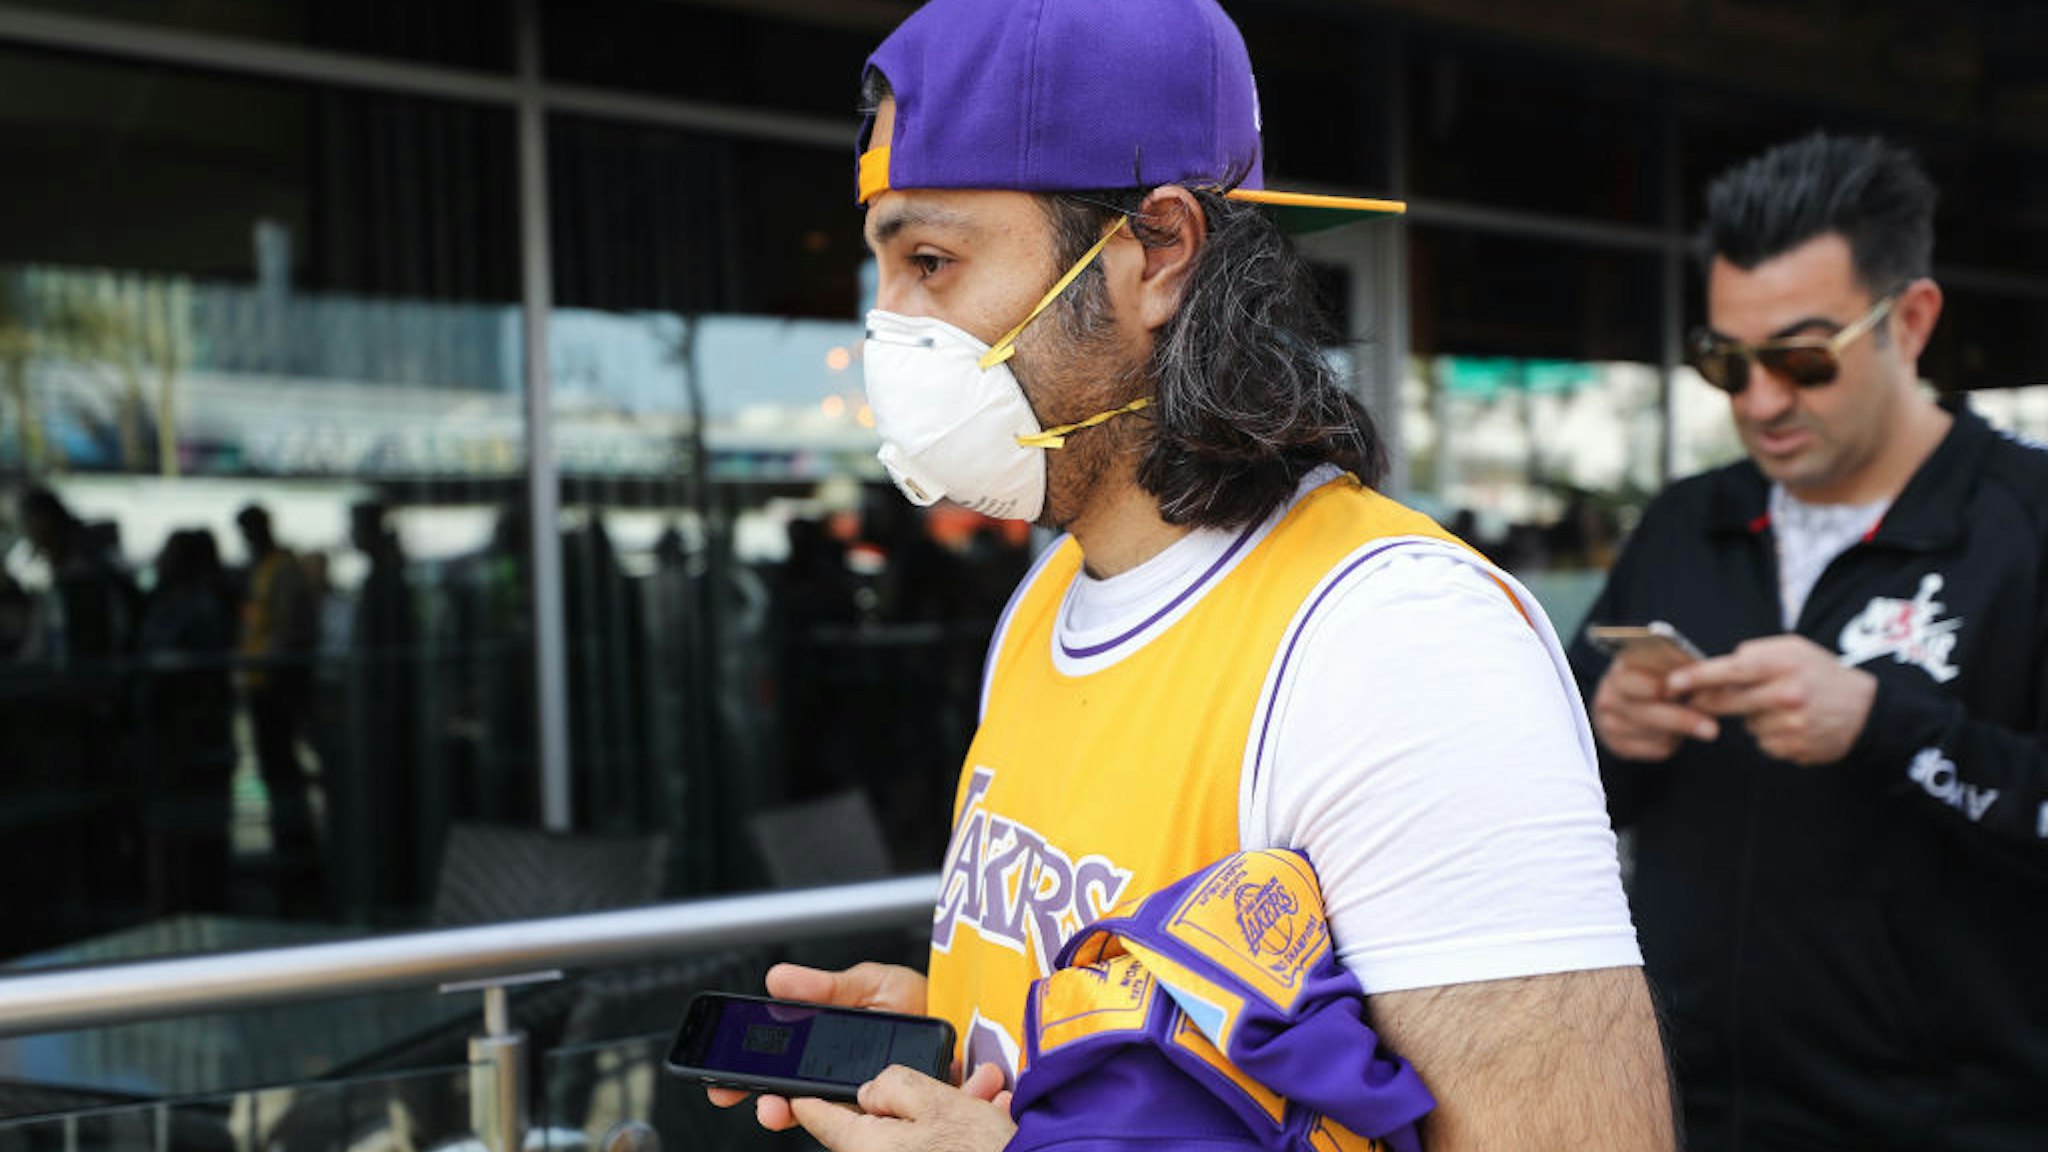 A fan wears a protective mask as people wait in line to attend the ‚ÄòCelebration of Life for Kobe and Gianna Bryant‚Äô memorial service at Staples Center on February 24, 2020 in Los Angeles, California. Los Angeles Lakers NBA star Kobe Bryant, 41, and his 13-year-old daughter Gianna were killed along with seven others in a helicopter crash near Los Angeles on January 26. (Photo by Mario Tama/Getty Images)